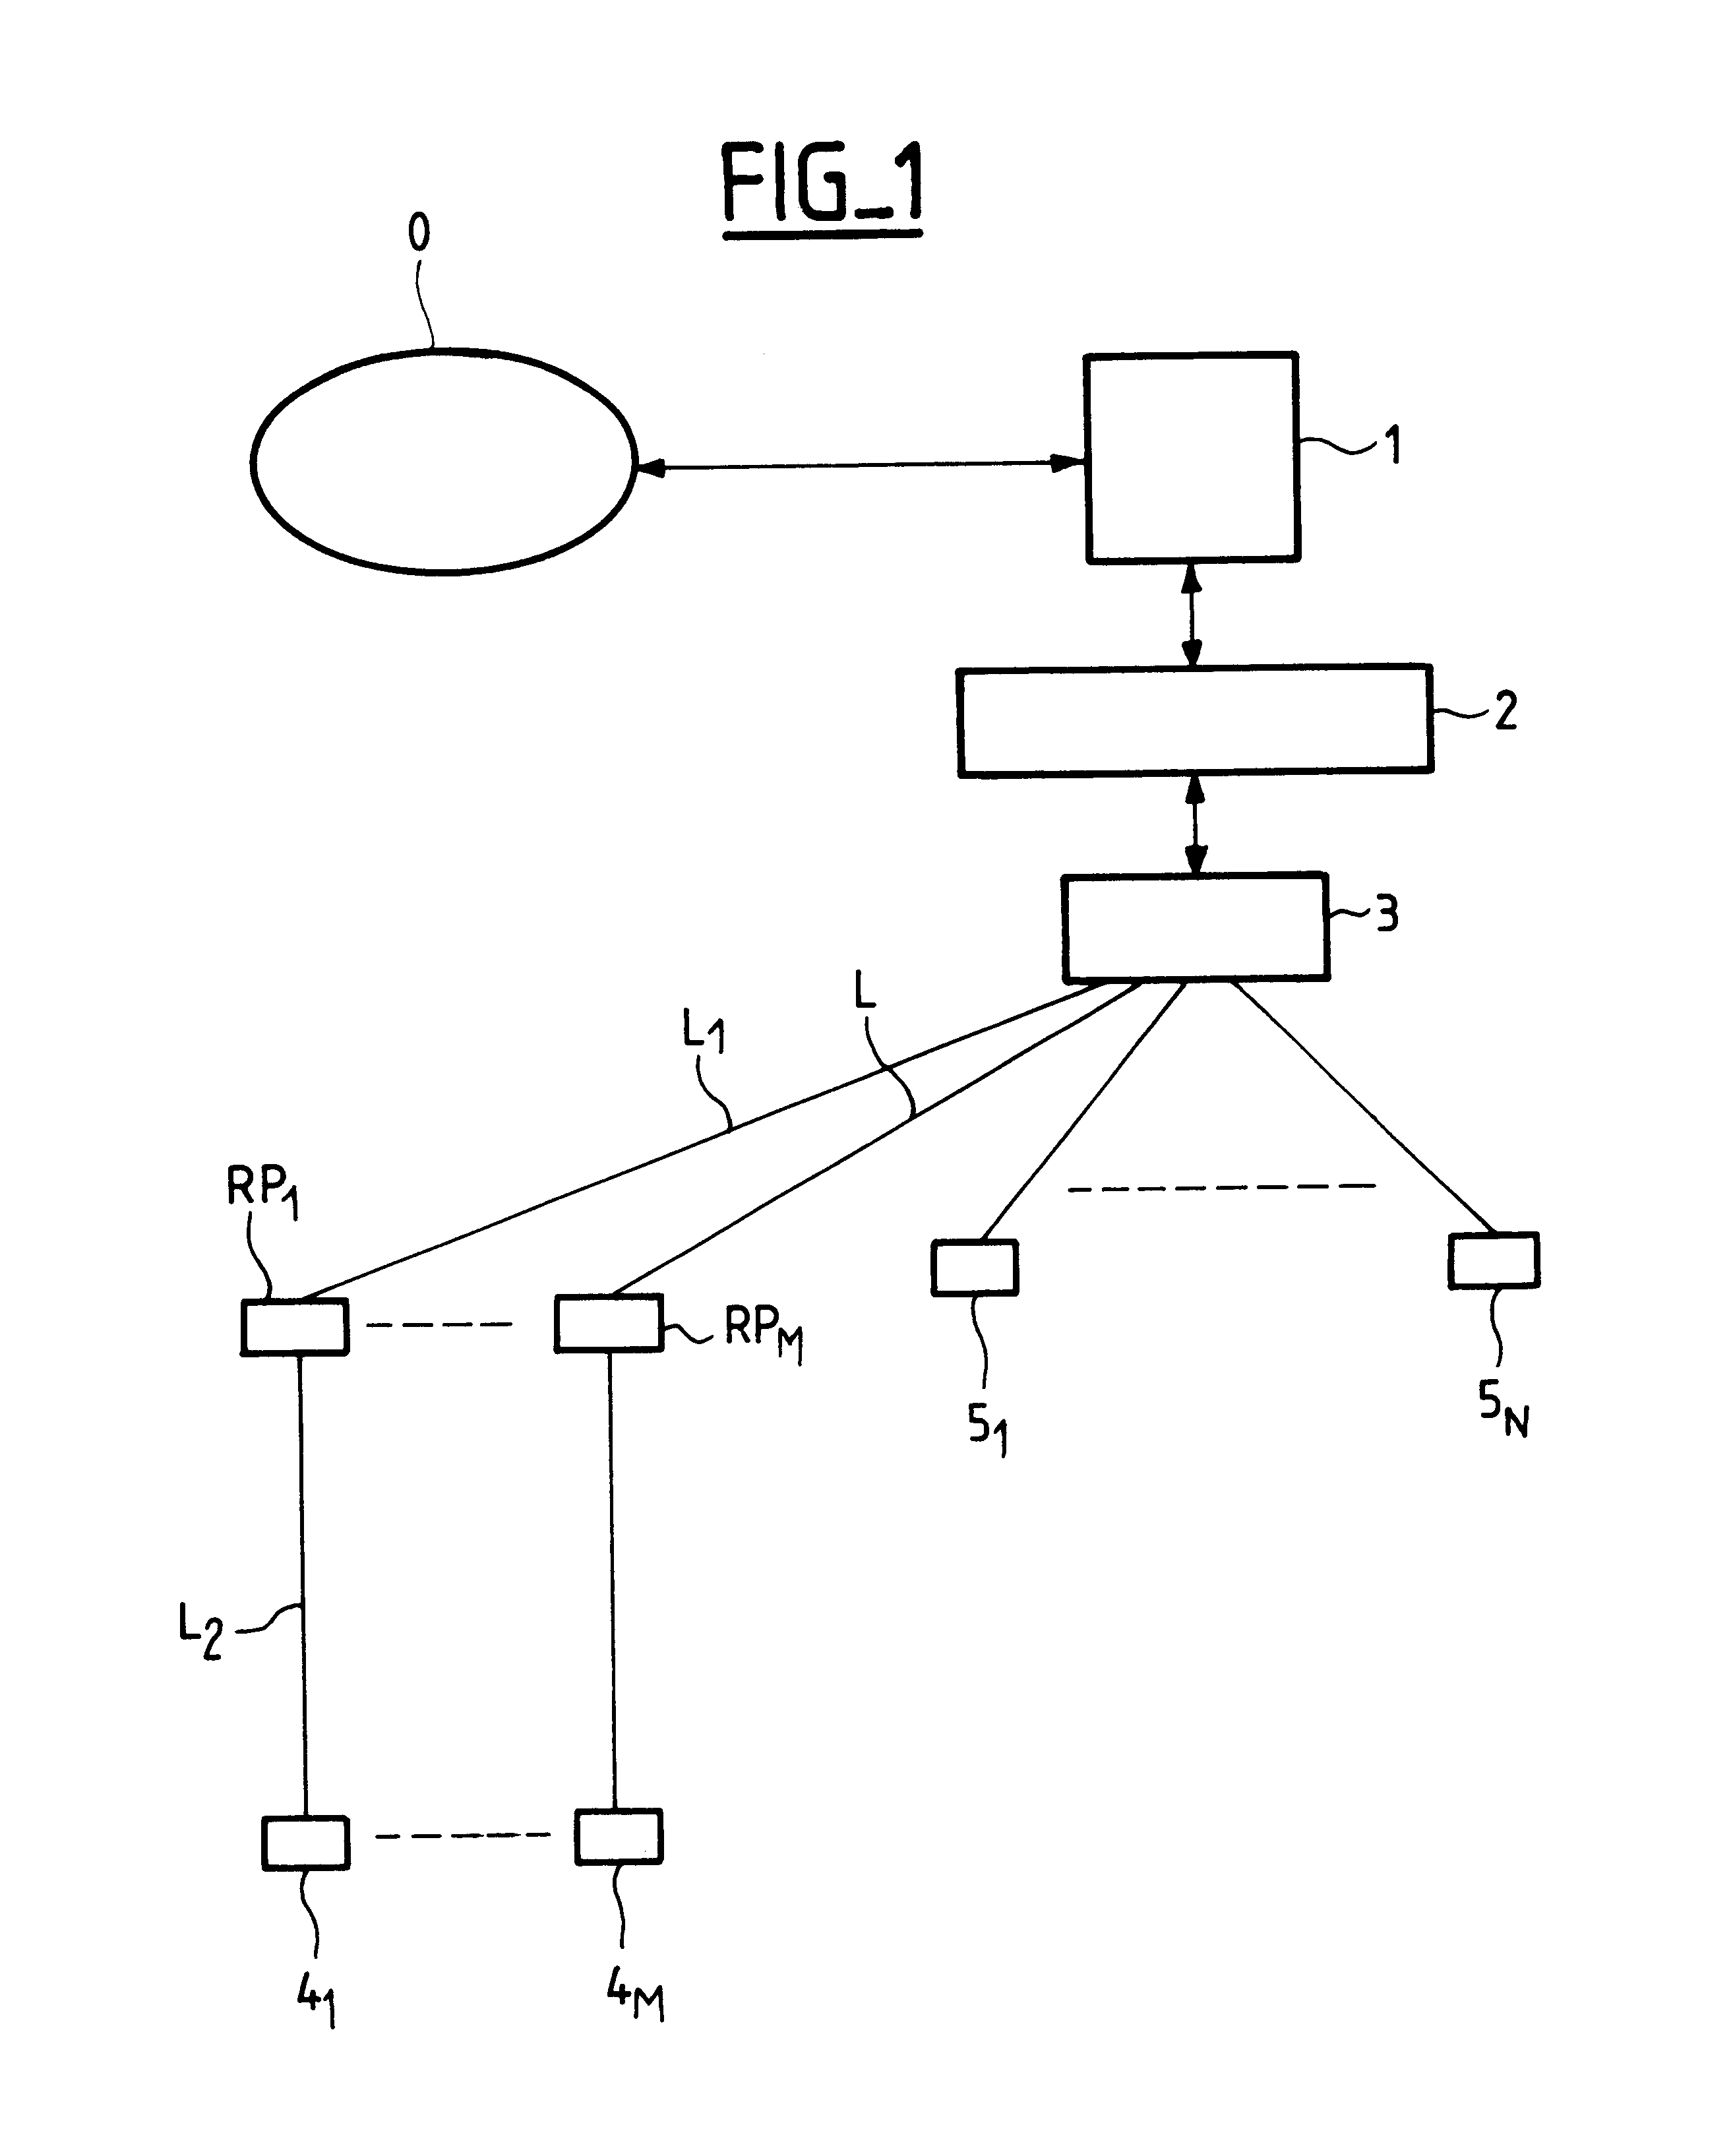 Method of providing a remote power feed to a terminal in a local area network, and corresponding remote power feed unit, concentrator, repeator, and terminal